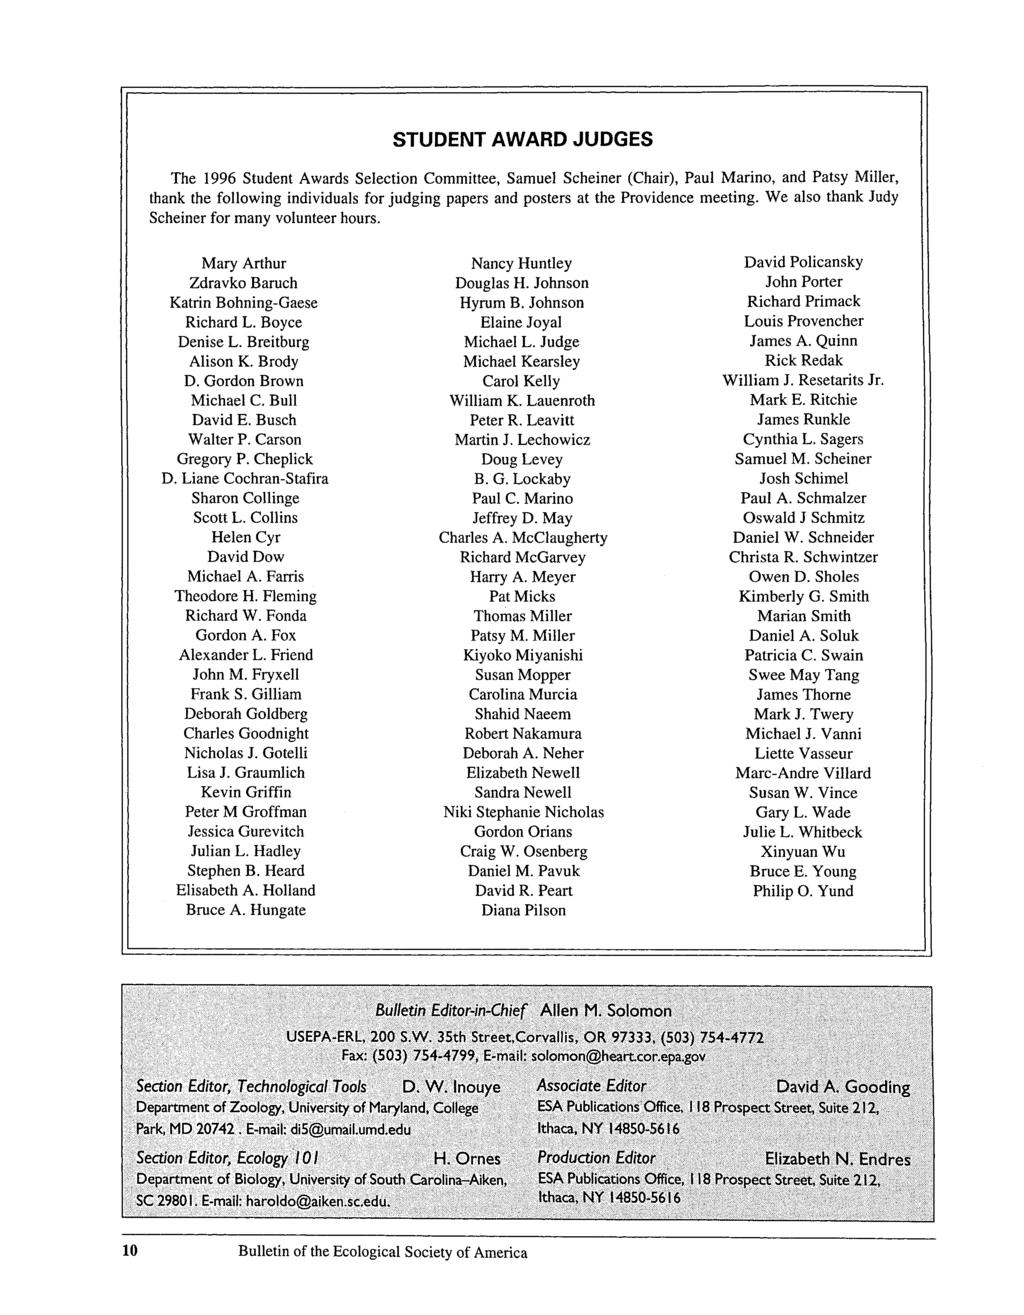 STUDENT AWARD JUDGES The 1996 Student Awards Selection Committee, Samuel Scheiner (Chair), Paul Marino, and Patsy Miller, thank the following individuals for judging papers and posters at the